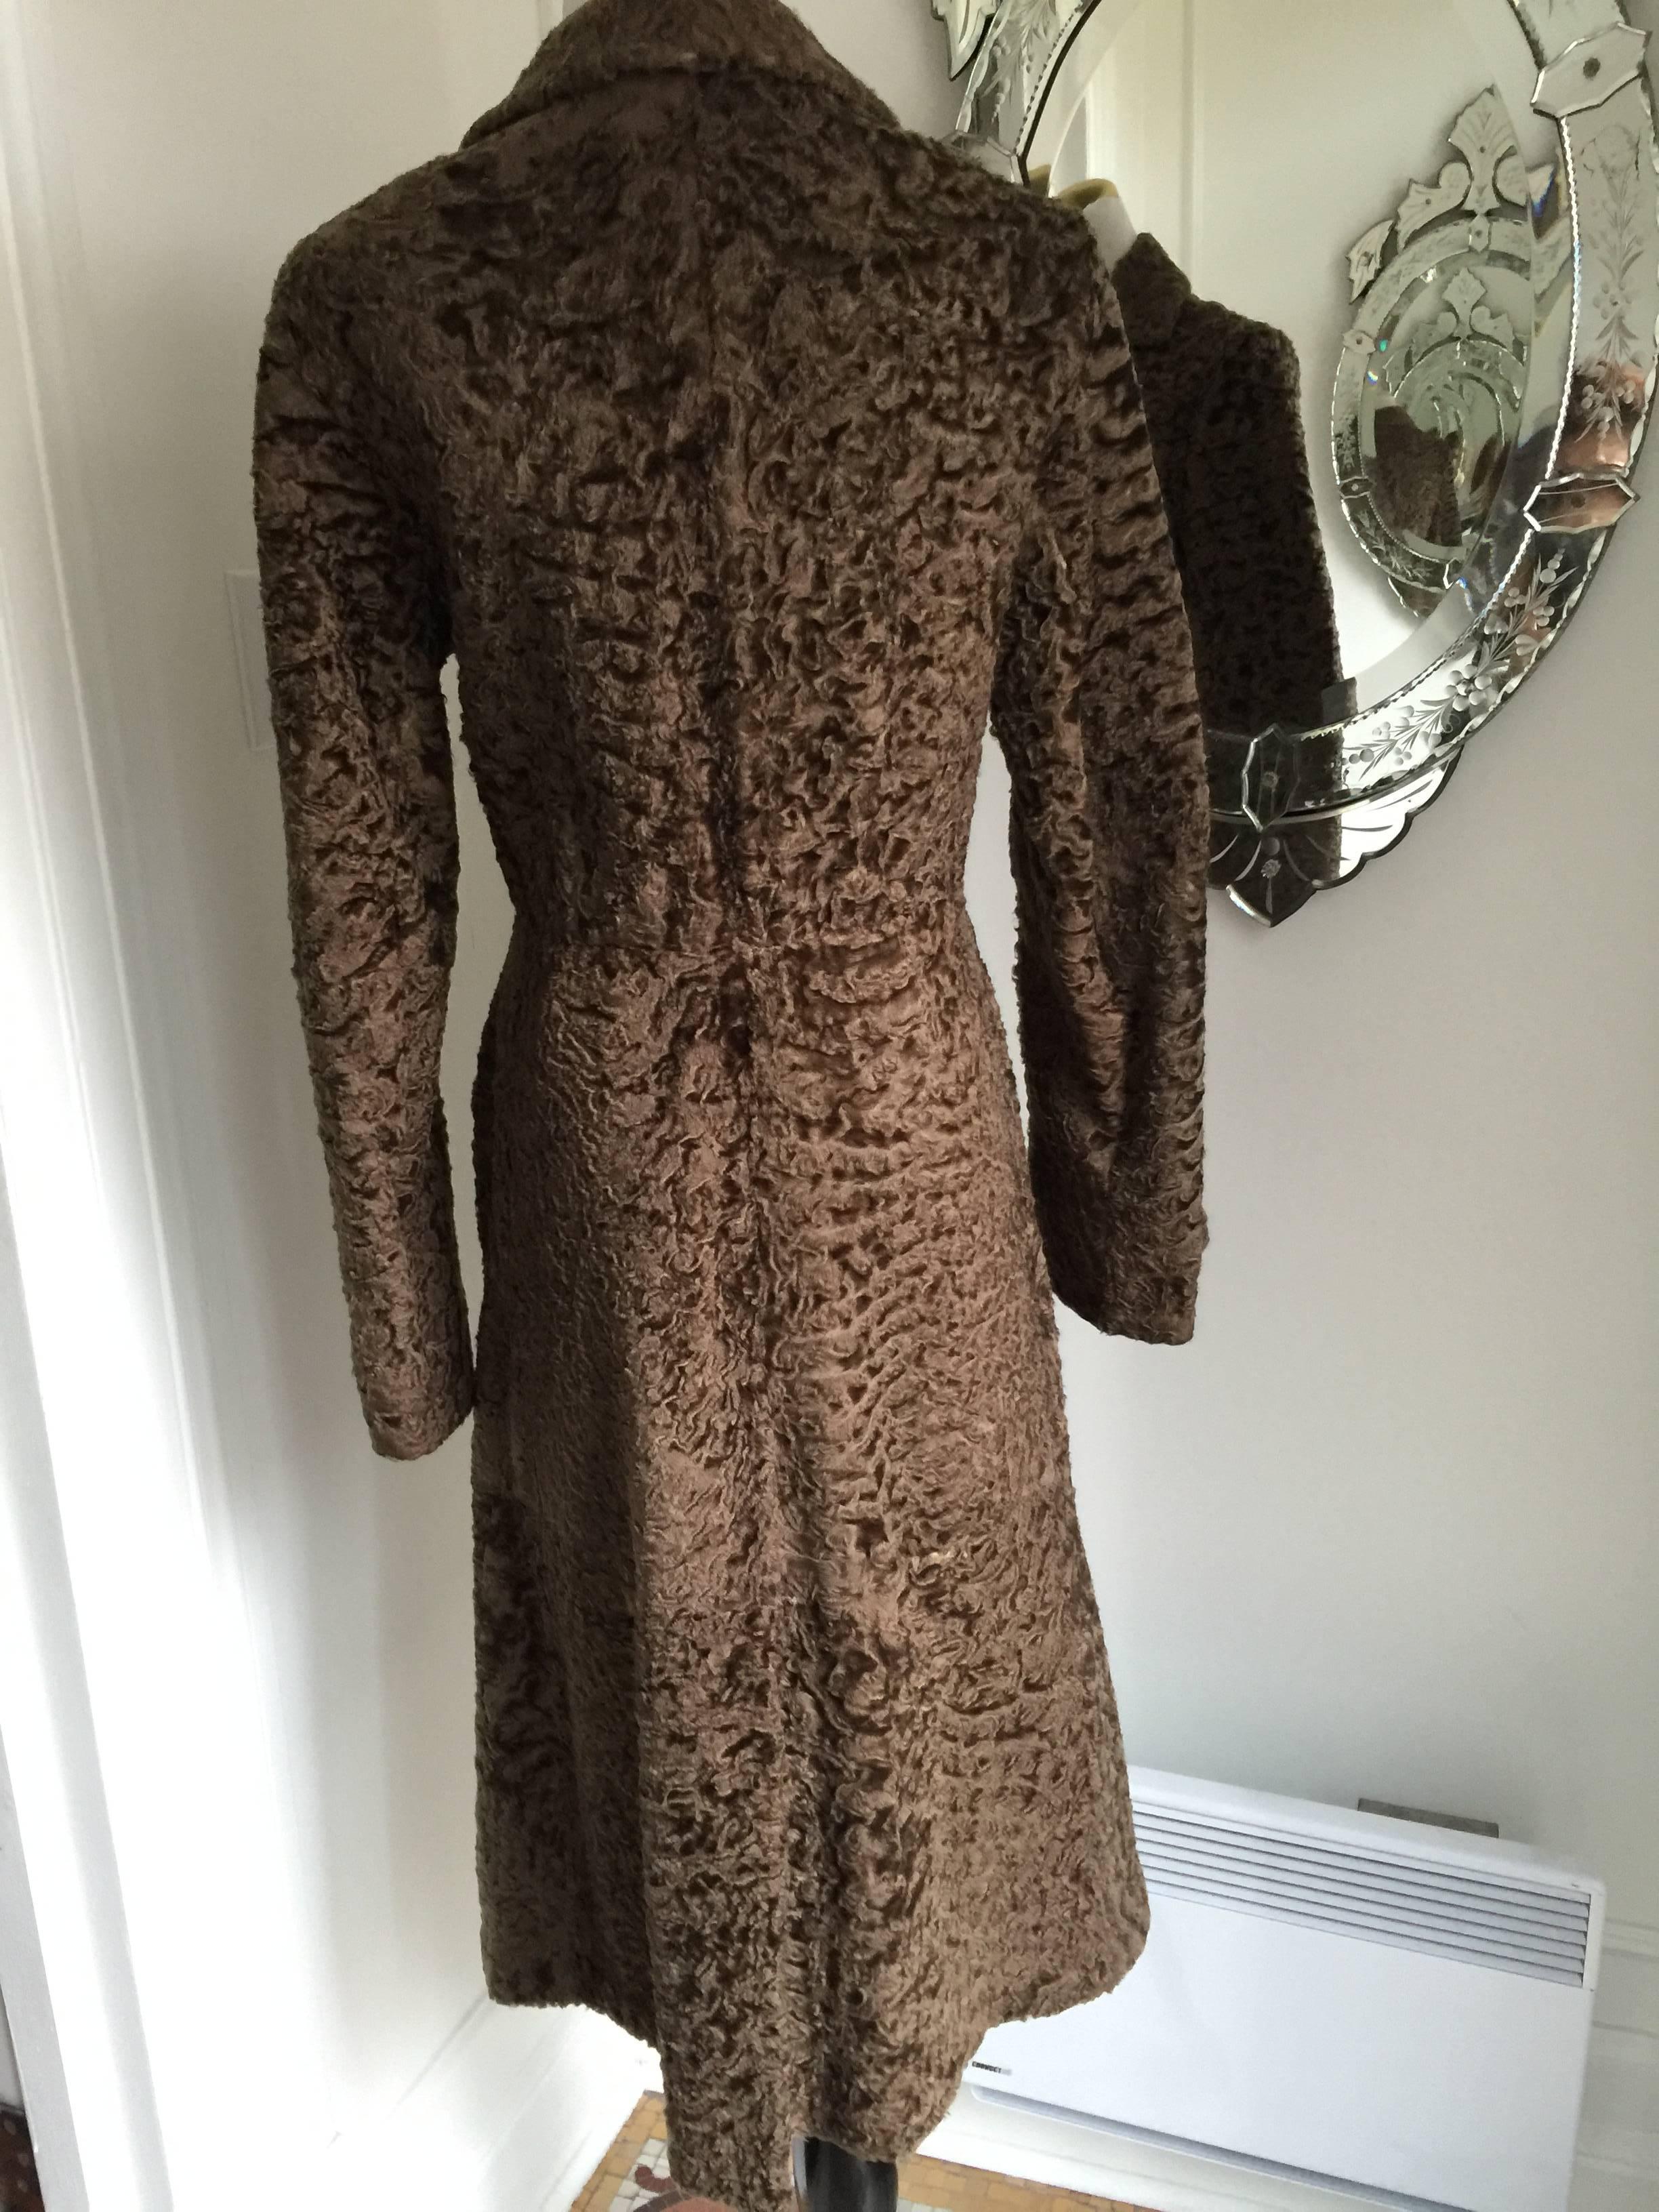 this Marni coat is a great addition to your wardrobe...easy to wear and it will keep you warm...
it is lined with a beautiful bold print ...the print adds charm and caracter to this classic and timeless piece...